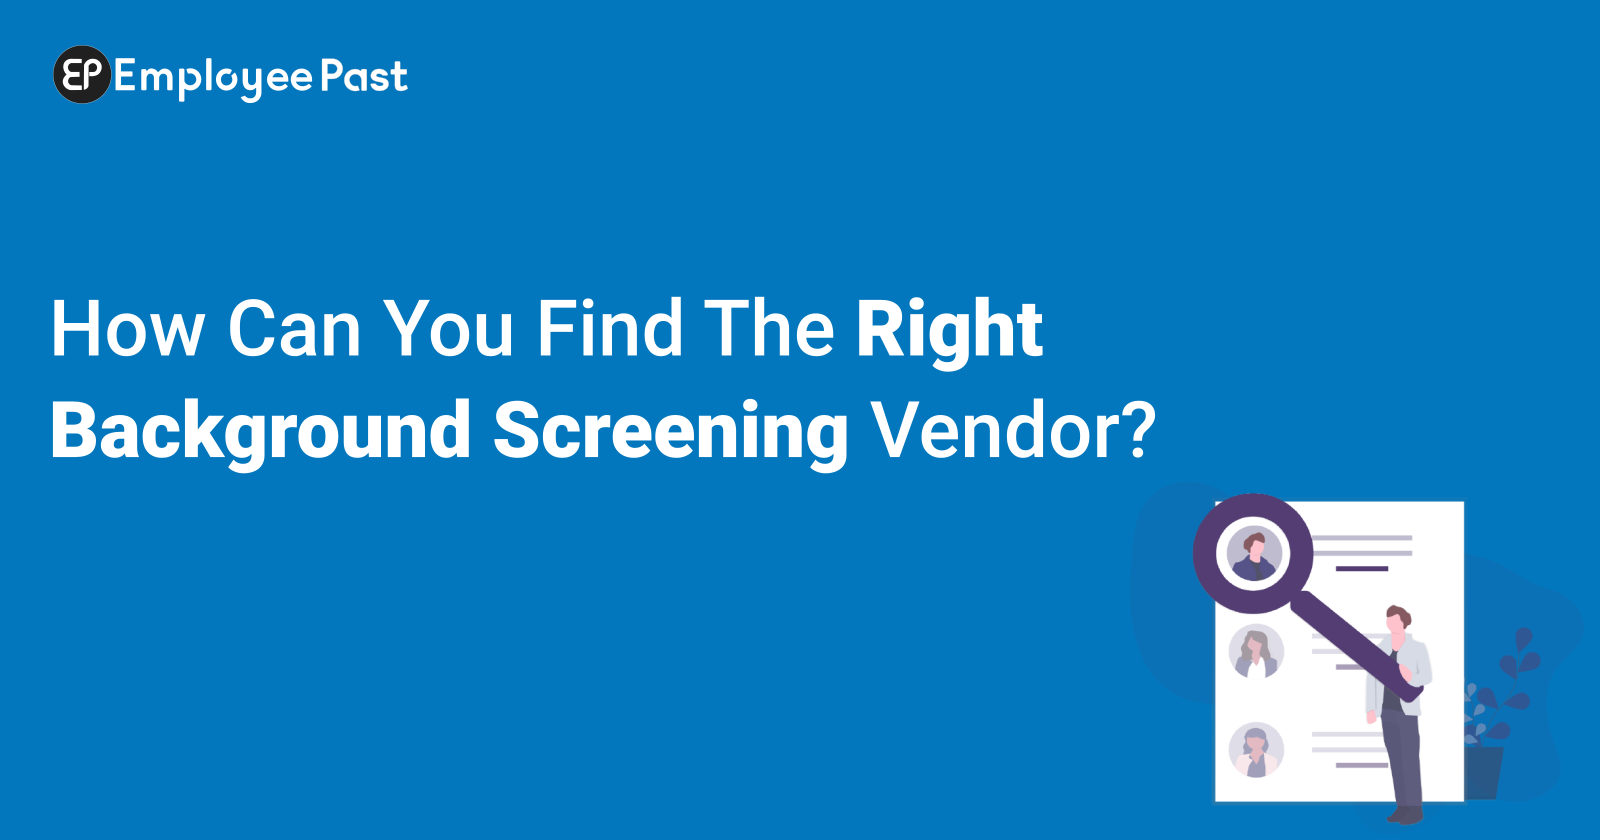 How Can You Find The Right Background Screening Vendor?